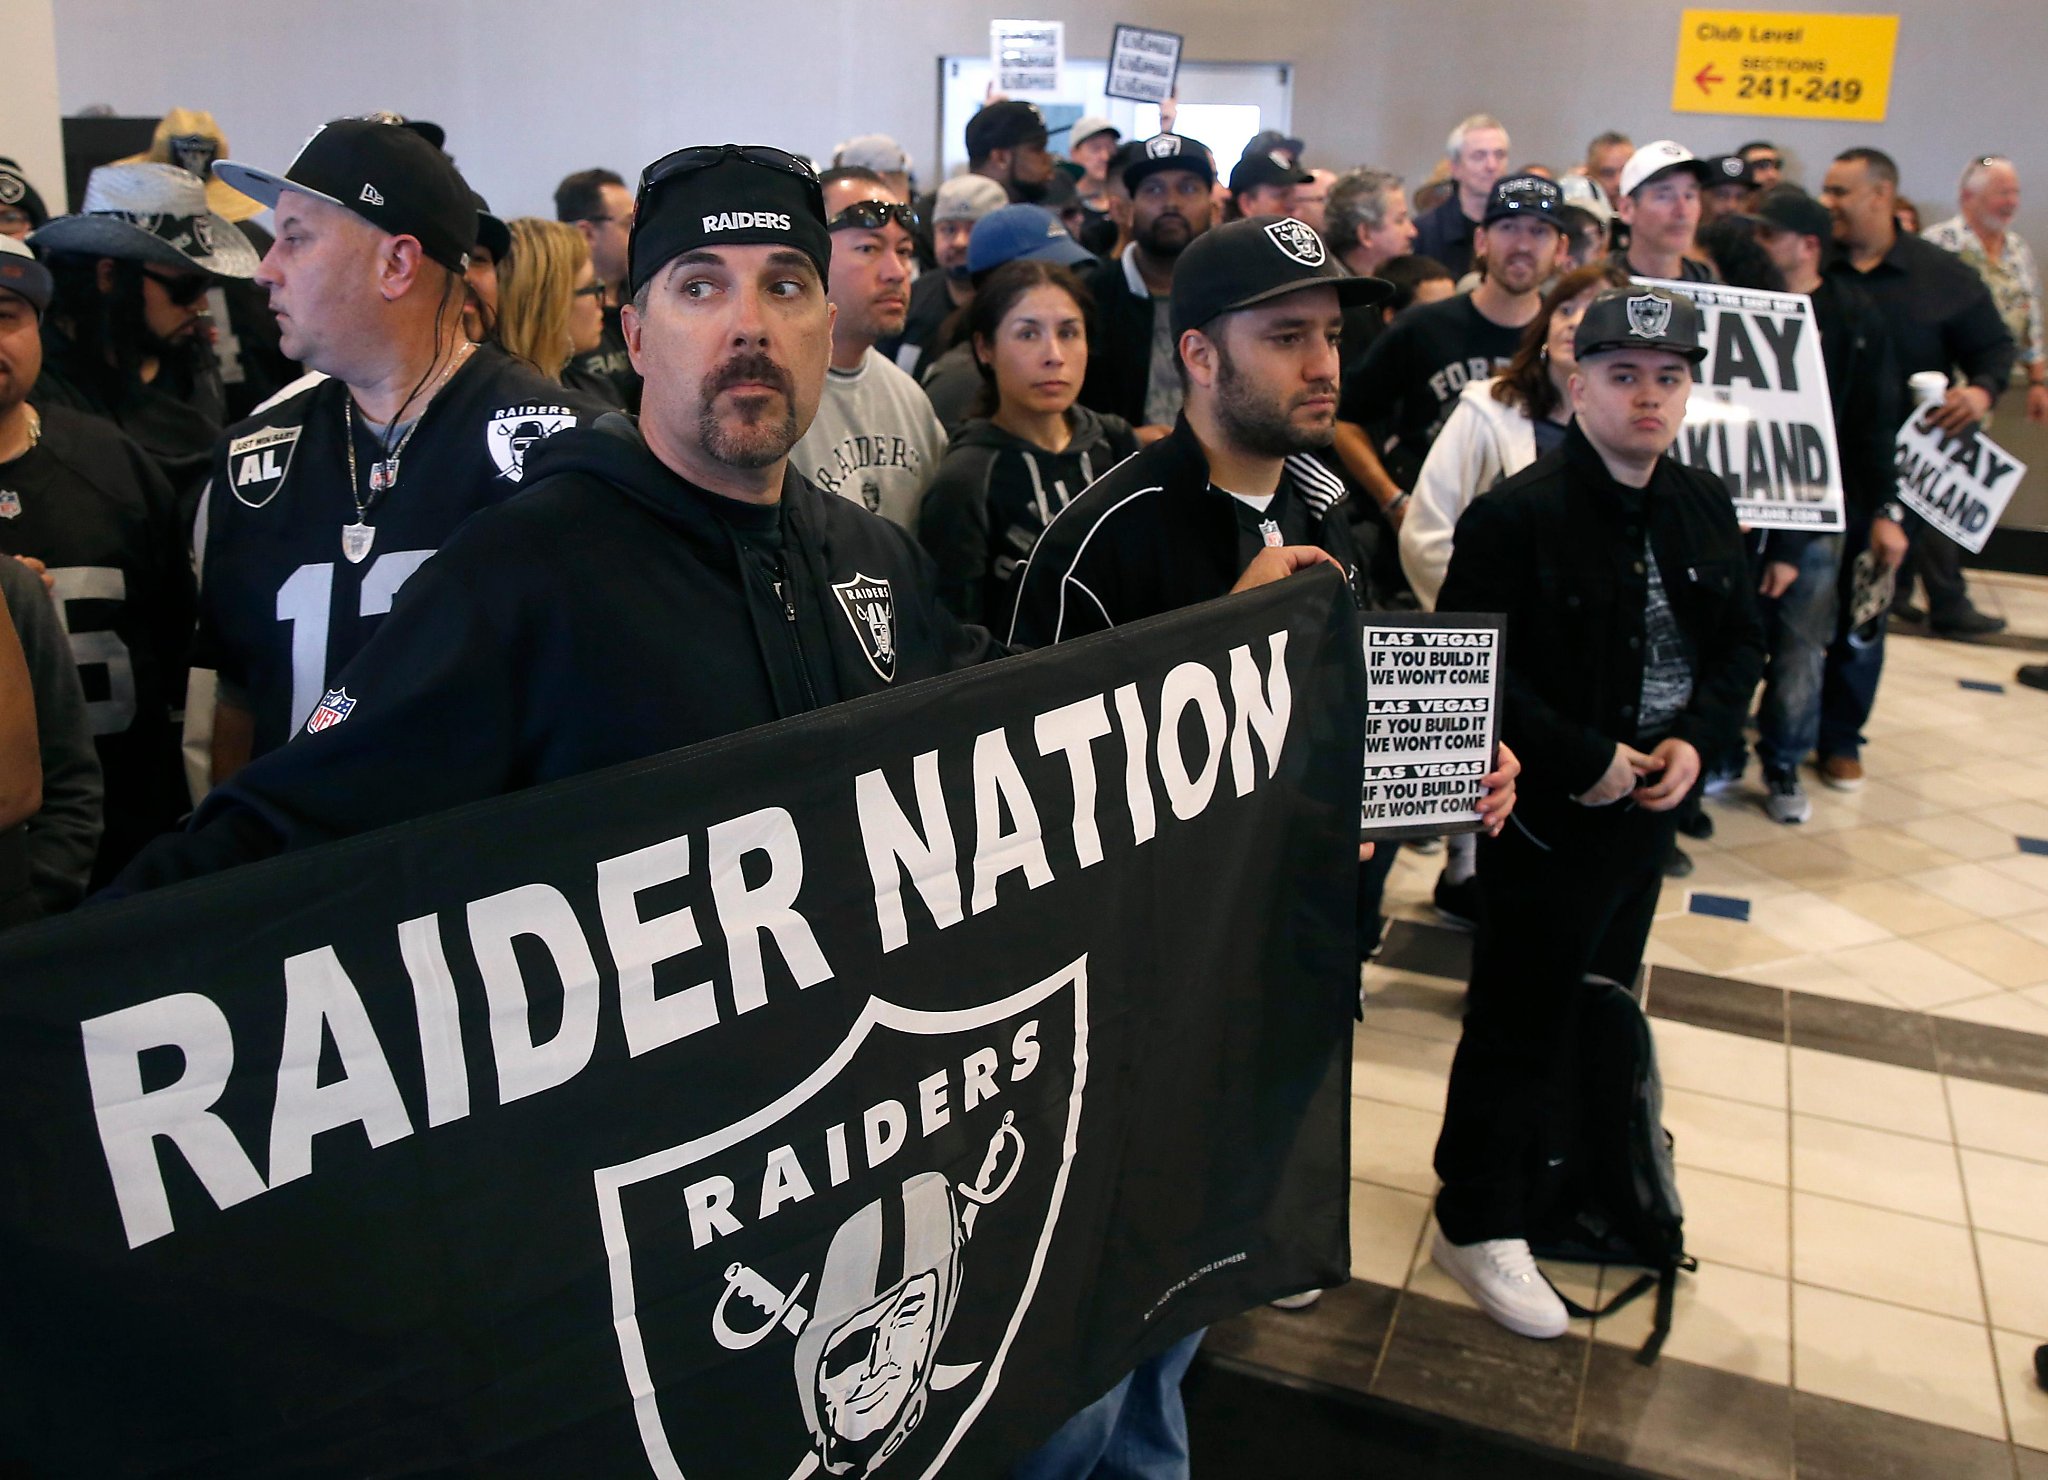 Raiders season tickets sell out: They may stick around another year